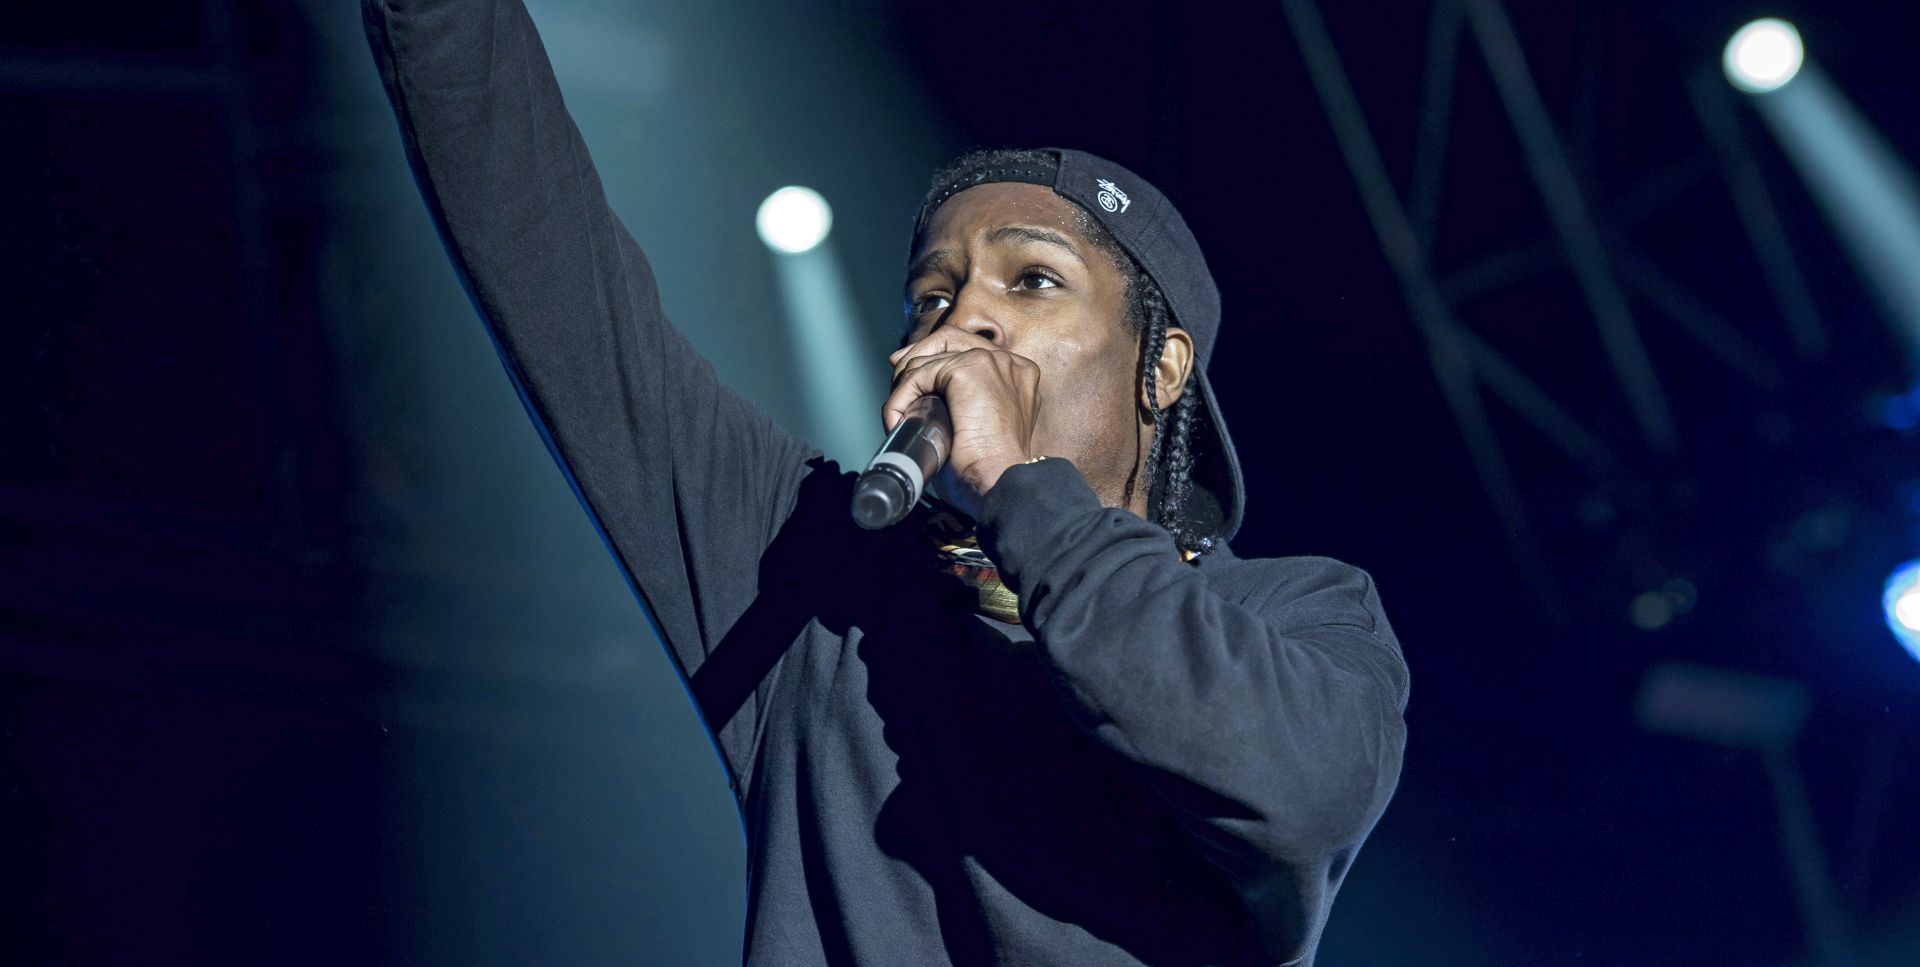 epa07772929 (FILE) - US rapper Rakim Mayers alias Asap Rocky performs on stage at the Openair Frauenfeld music festival, Switzerland, 12 July 2013 (reissued 14 August 2019) The Stockholm District Court on 14 August 2019 found US rapper ASAP Rocky guilty of assault and gave him a suspended sentence. ASAP Rocky was detained in Stockholm on 03 June and released at the conclusion of the trial on 02 August after which he left the country.  EPA/GIAN EHRENZELLER *** Local Caption *** 50916074